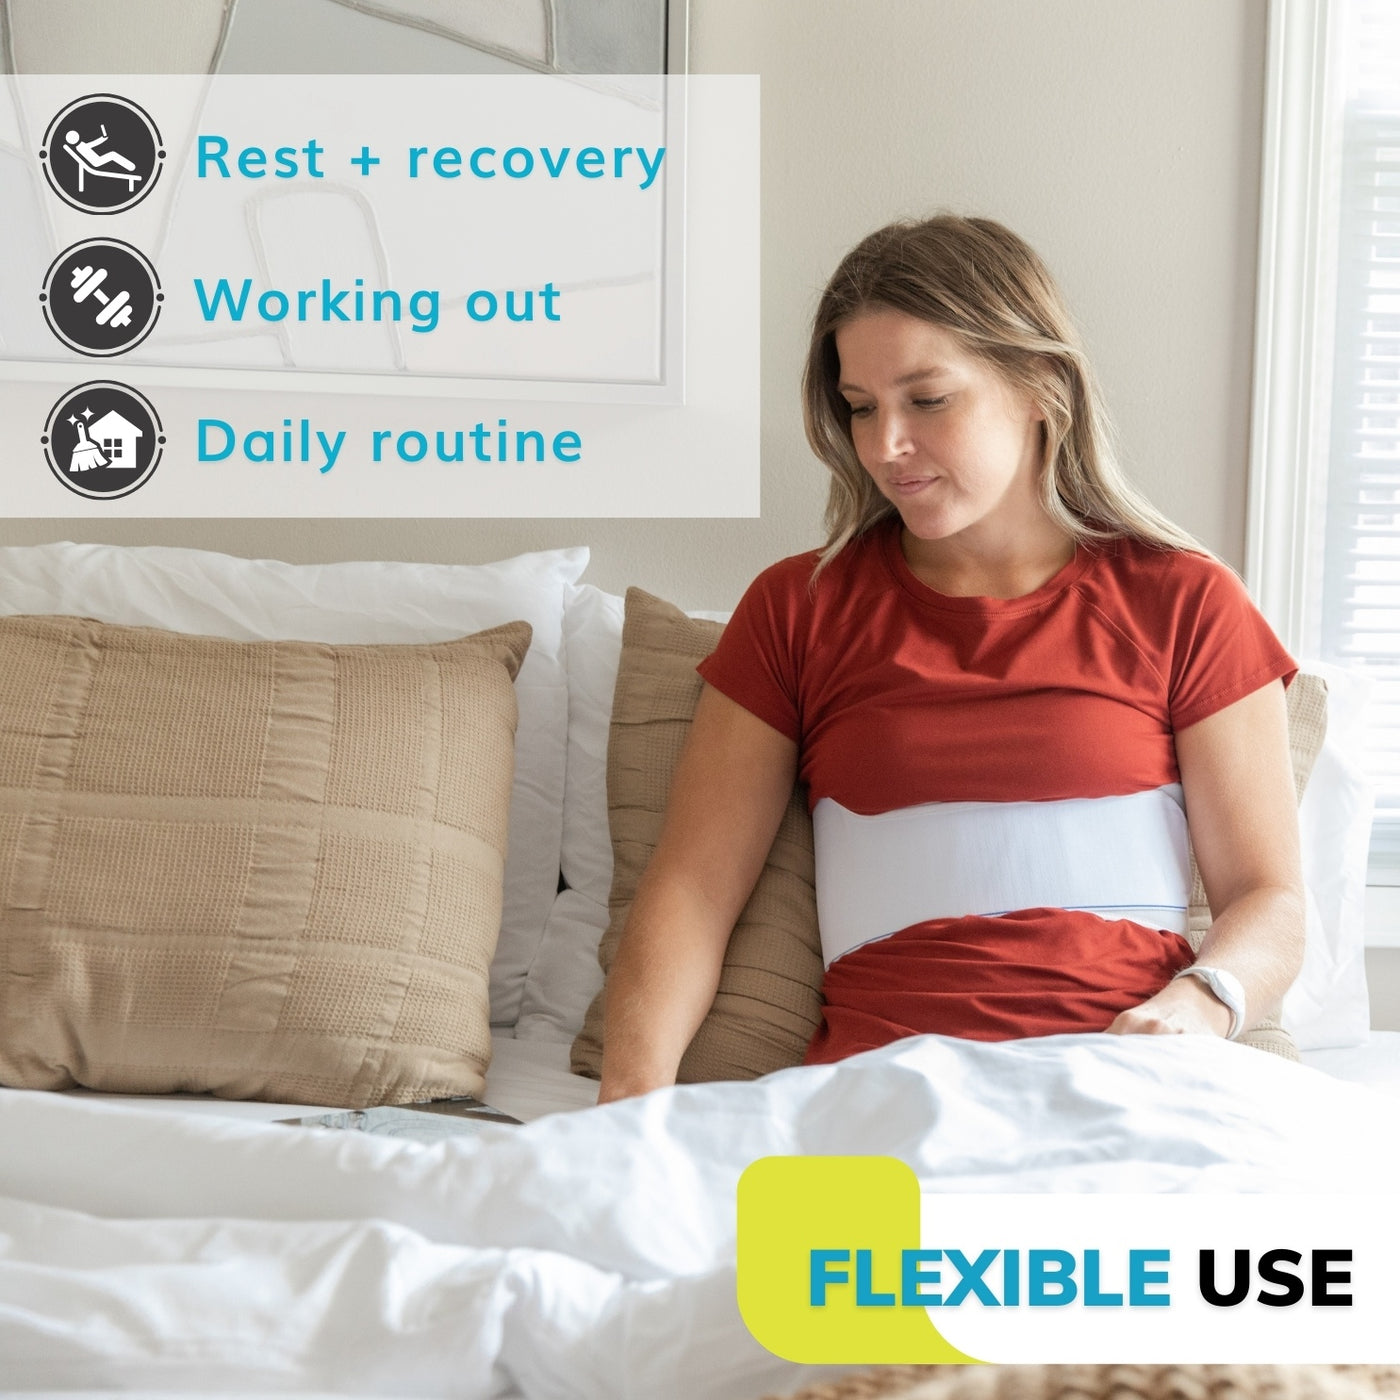 The womens support belt for rib cage injuries can be worn while sleeping, working out, and for daily use